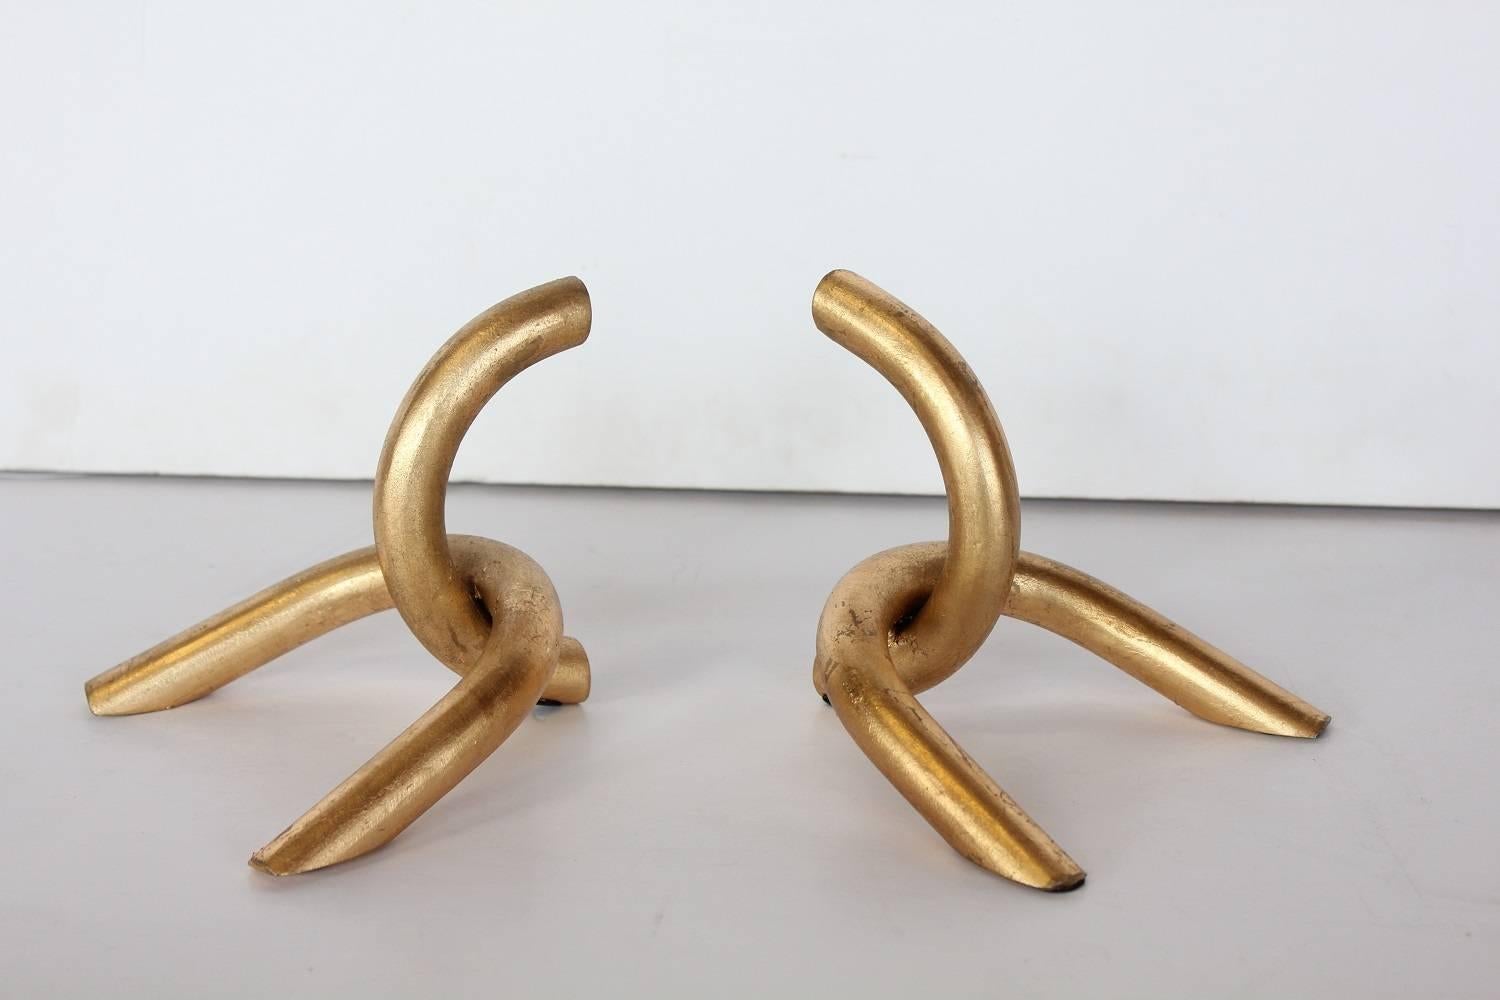 Stylish modernist gilded chain link bookends.